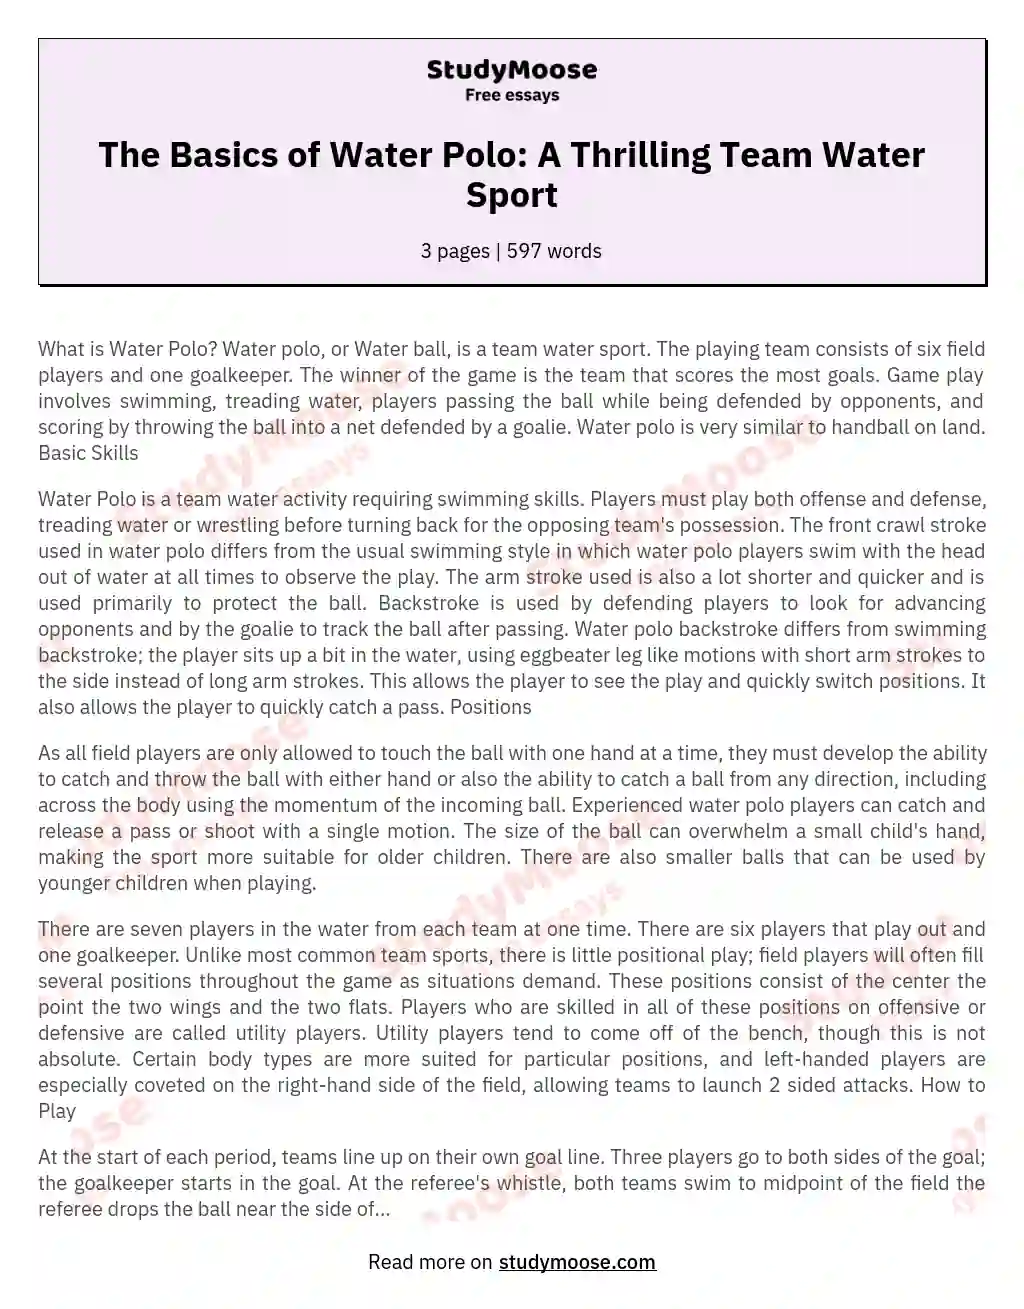 The Basics of Water Polo: A Thrilling Team Water Sport essay